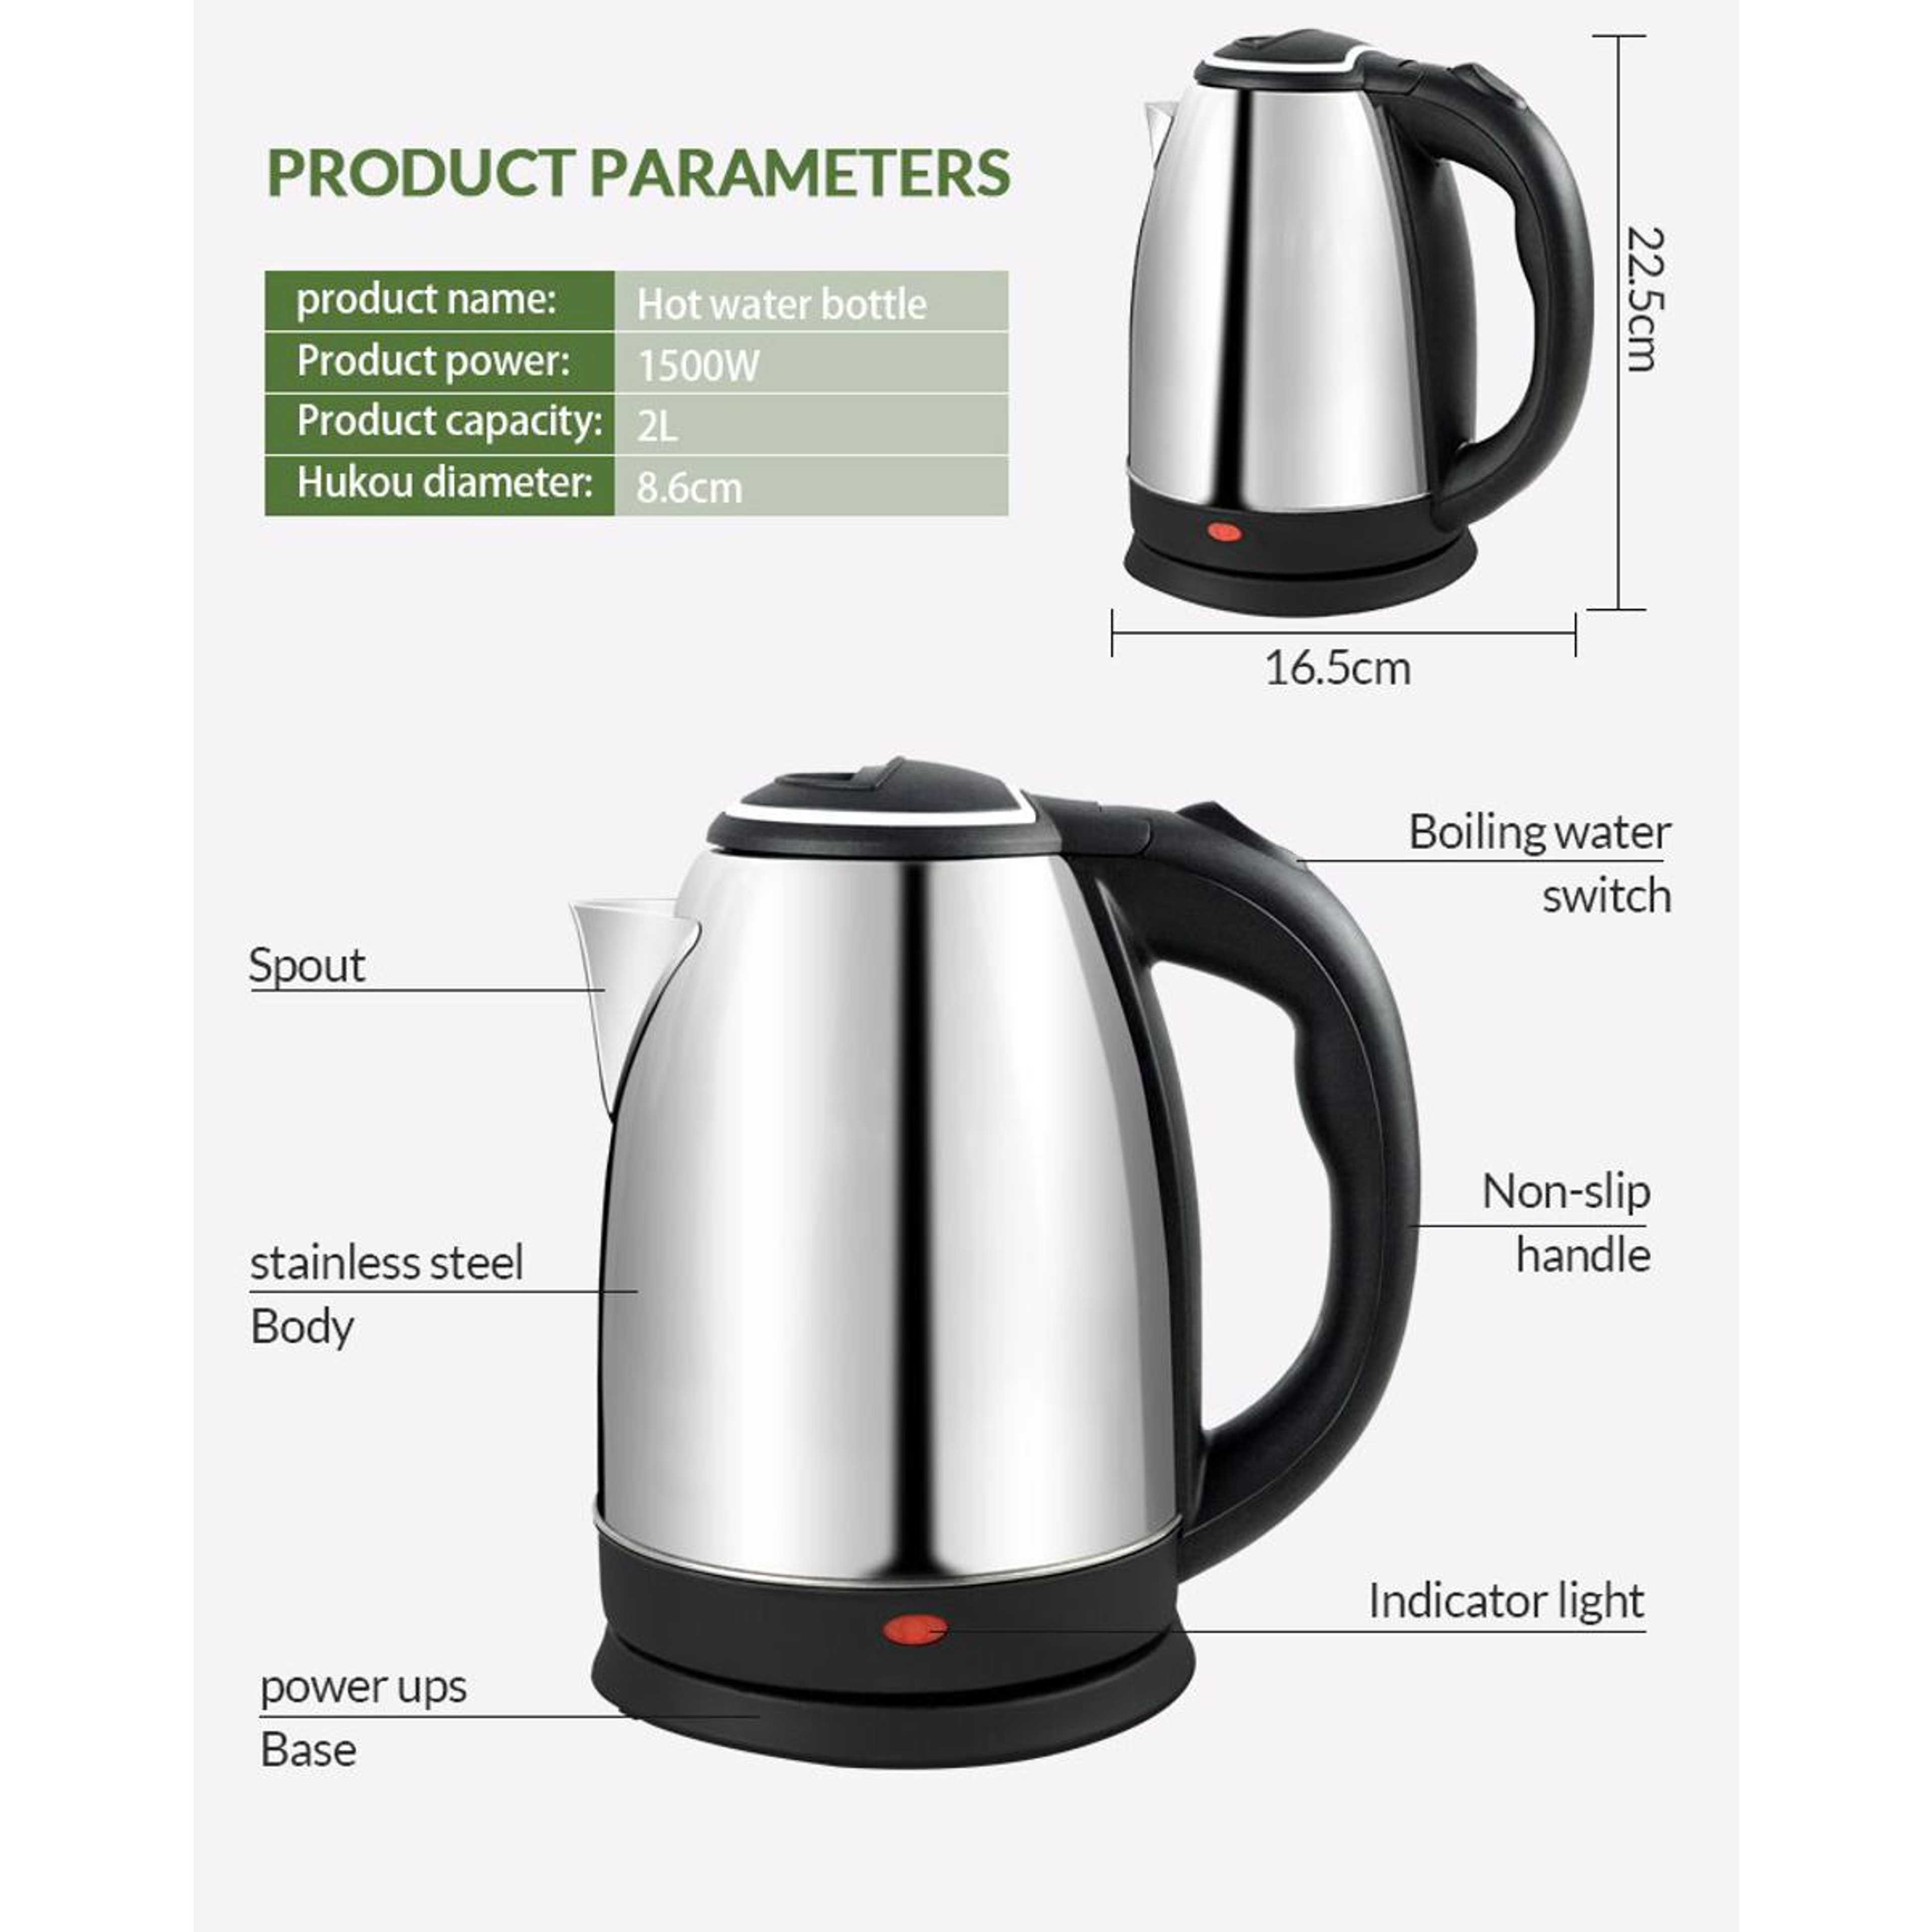 Premium Electric Kettle with Stainless Steel body and Automatic Switch Function - 1.7L & 2.0L